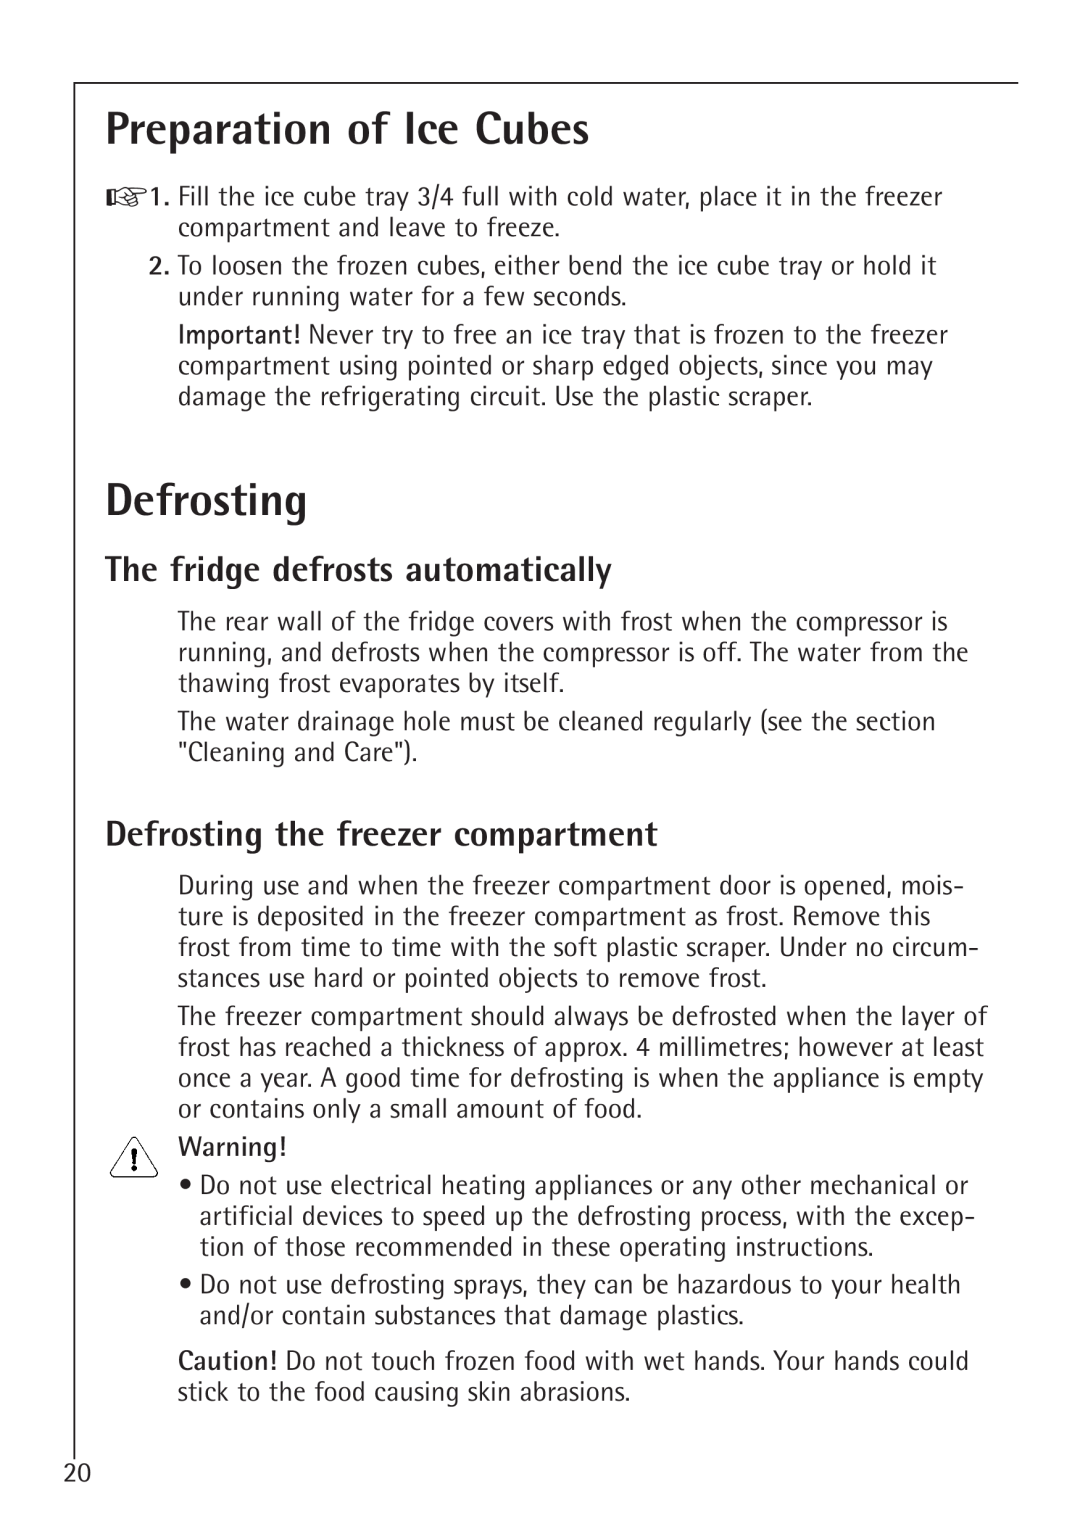 Electrolux 1583-8 TK operating instructions Preparation of Ice Cubes, Defrosting, The fridge defrosts automatically 